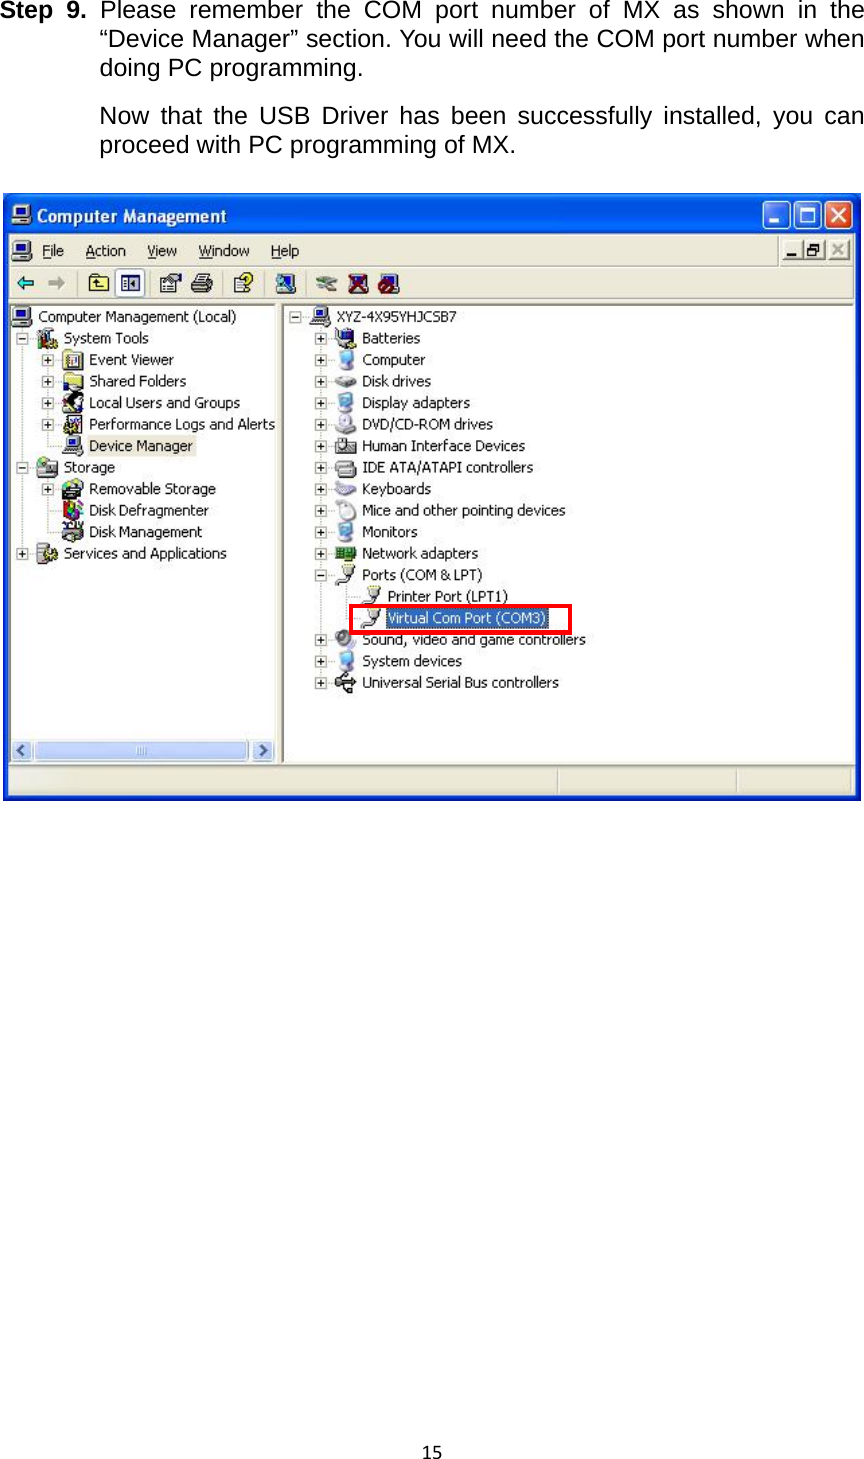 15Step 9. Please remember the COM port number of MX as shown in the “Device Manager” section. You will need the COM port number when doing PC programming.   Now that the USB Driver has been successfully installed, you can proceed with PC programming of MX.        